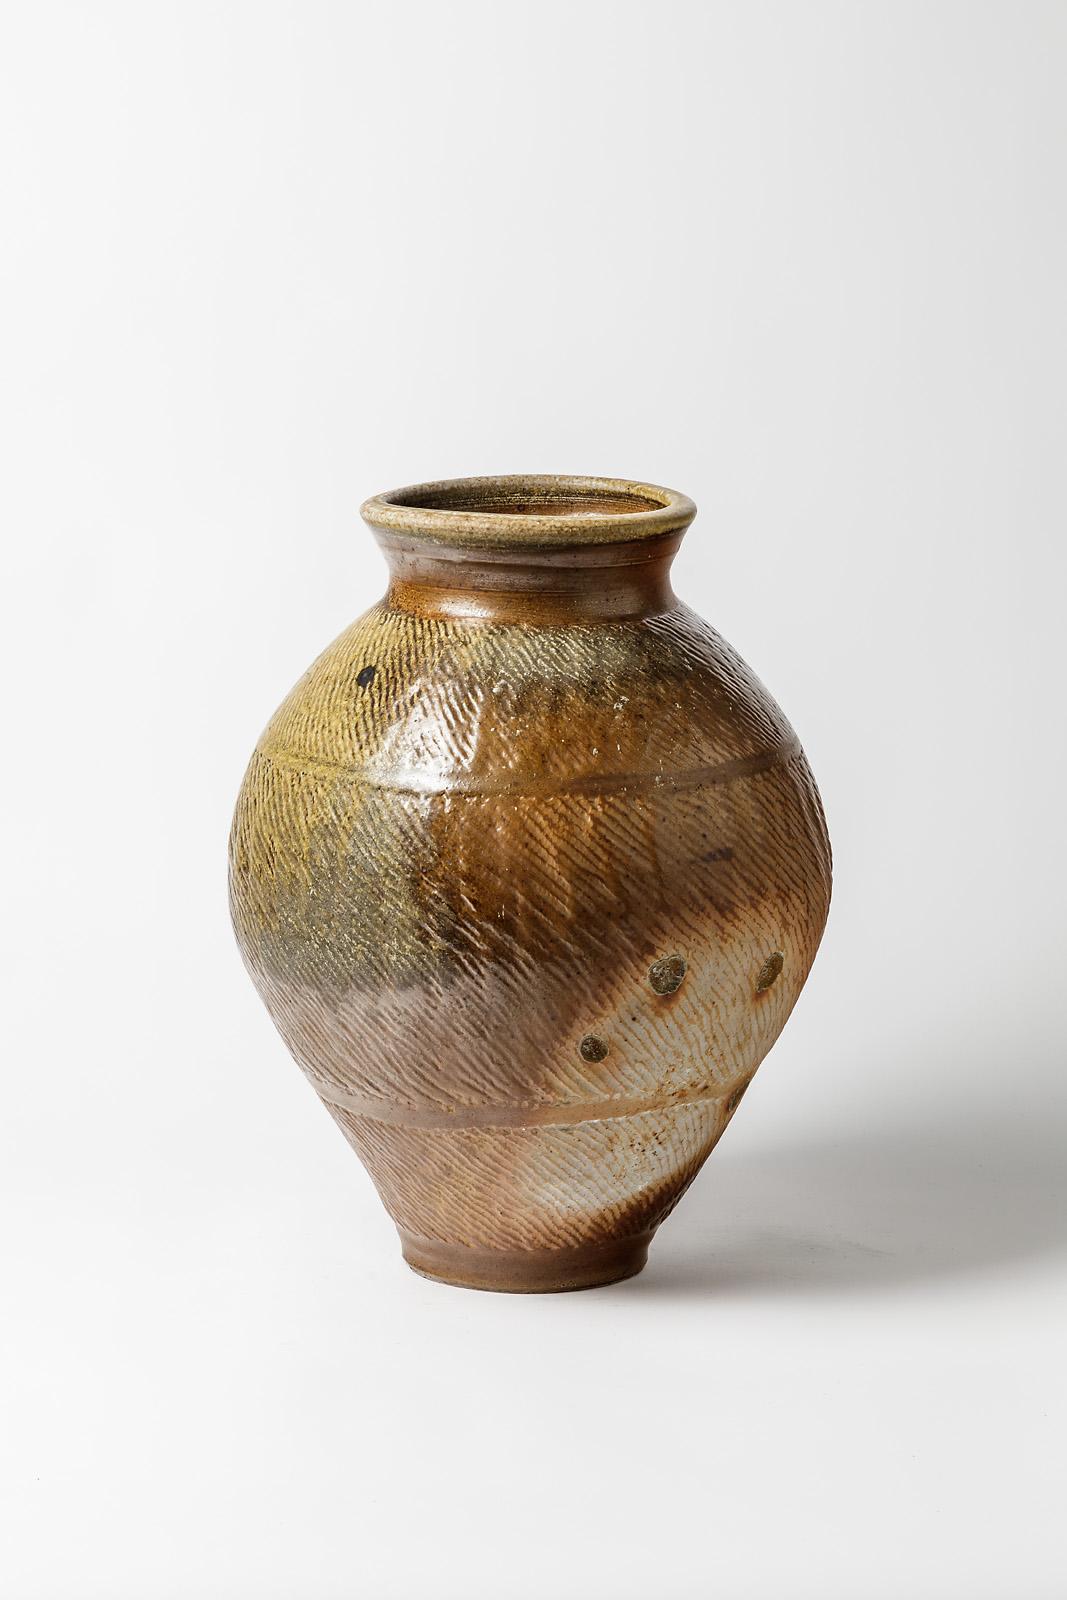 Steen Kepp - La Borne

Realised circa 1975-1980

Large brown and white stoneware ceramic floor vase.

Signed under the base

Original perfect condition

Measures: Height 41 cm
Large 28 cm.
    